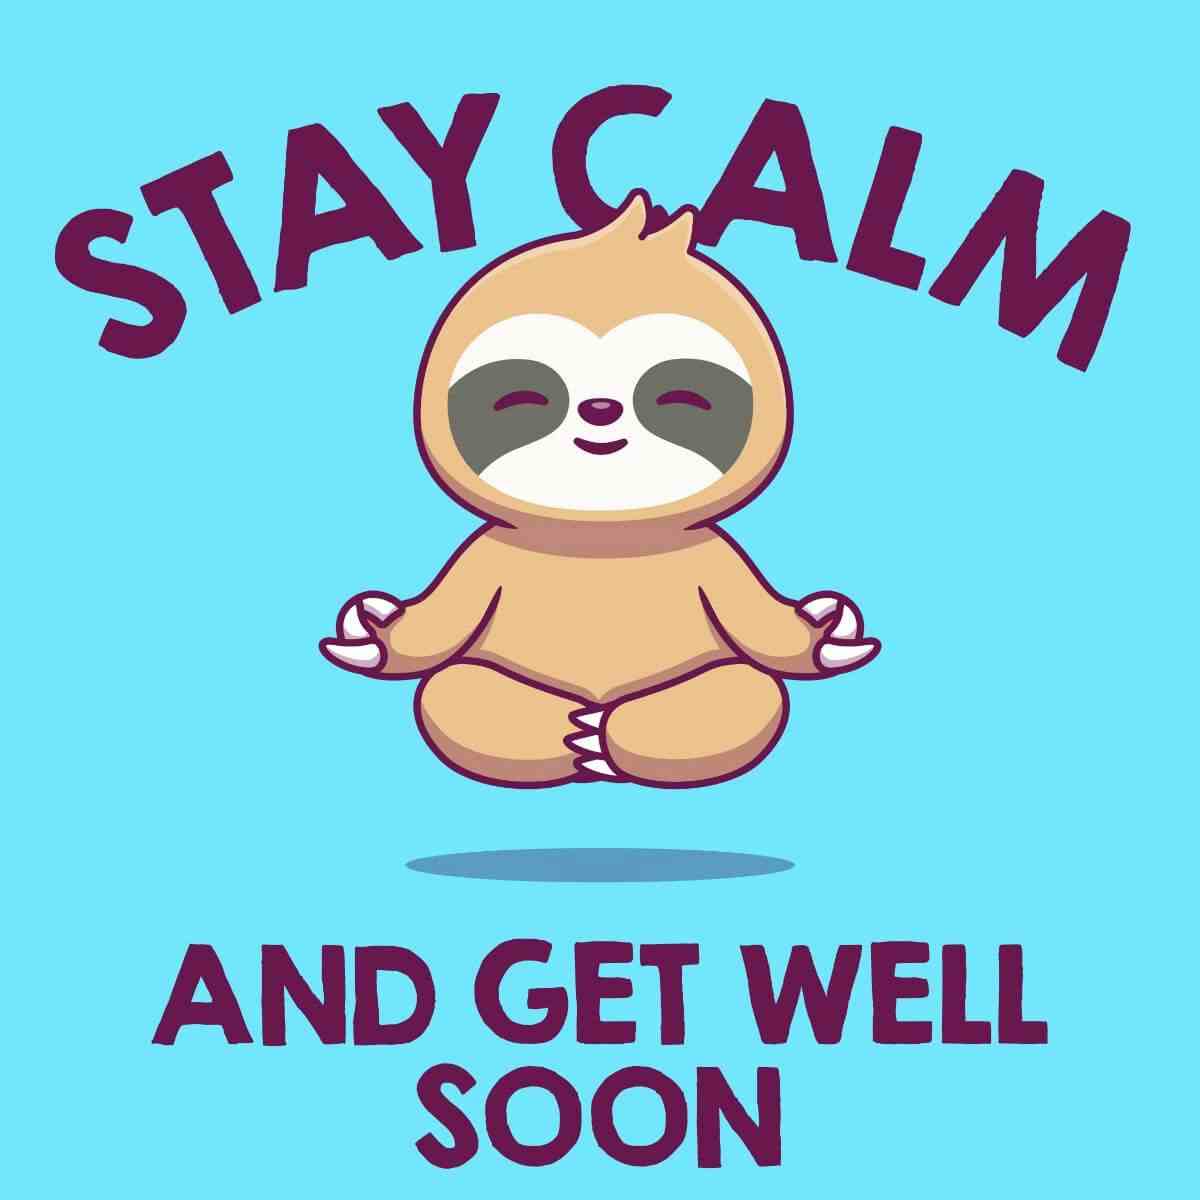 Card Stay calm and get well soon